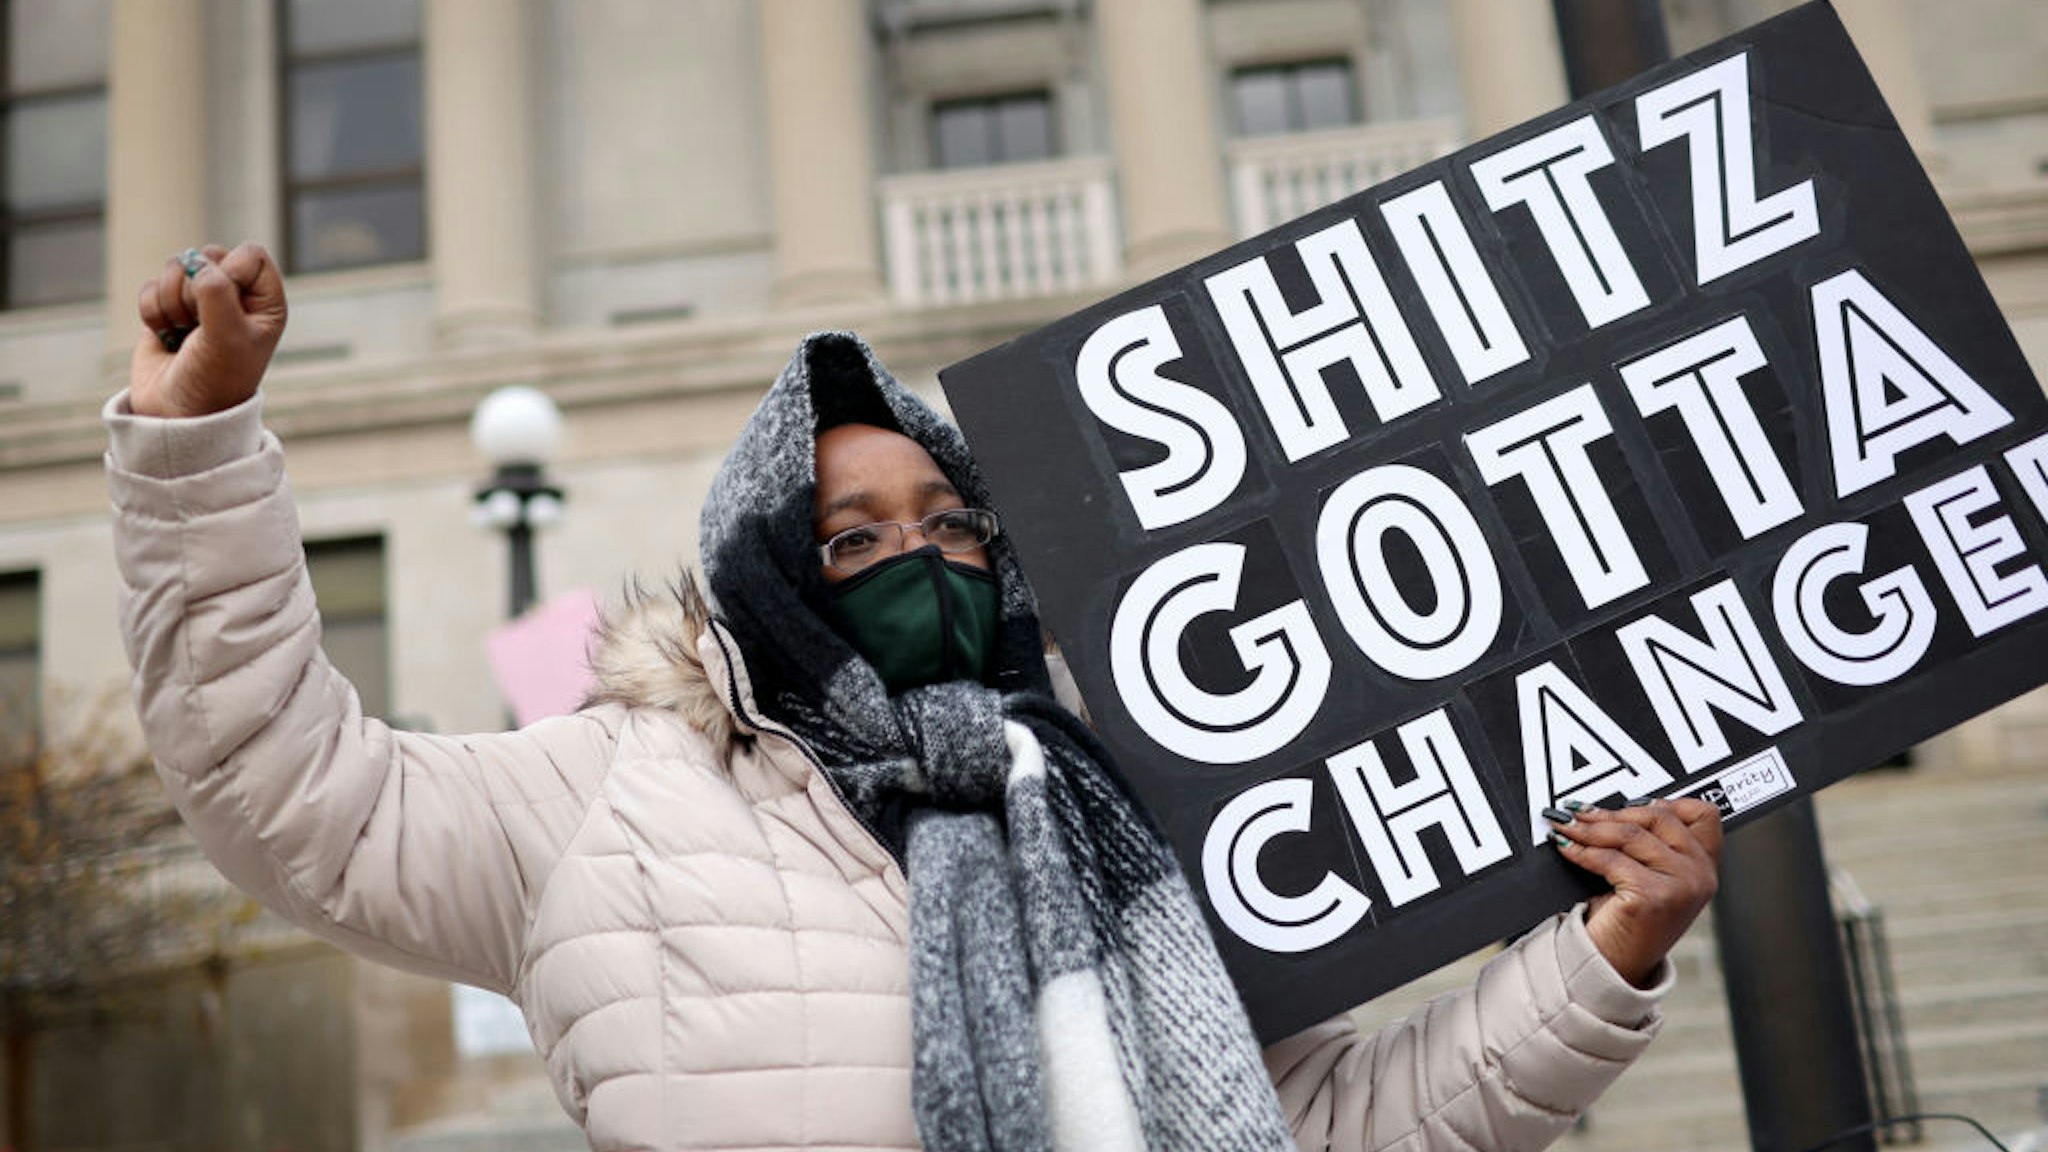 Demonstrators protest outside of the Kenosha County Courthouse as the jury listens to closing arguments in the trial of Kyle Rittenhouse on November 15, 2021 in Kenosha, Wisconsin.